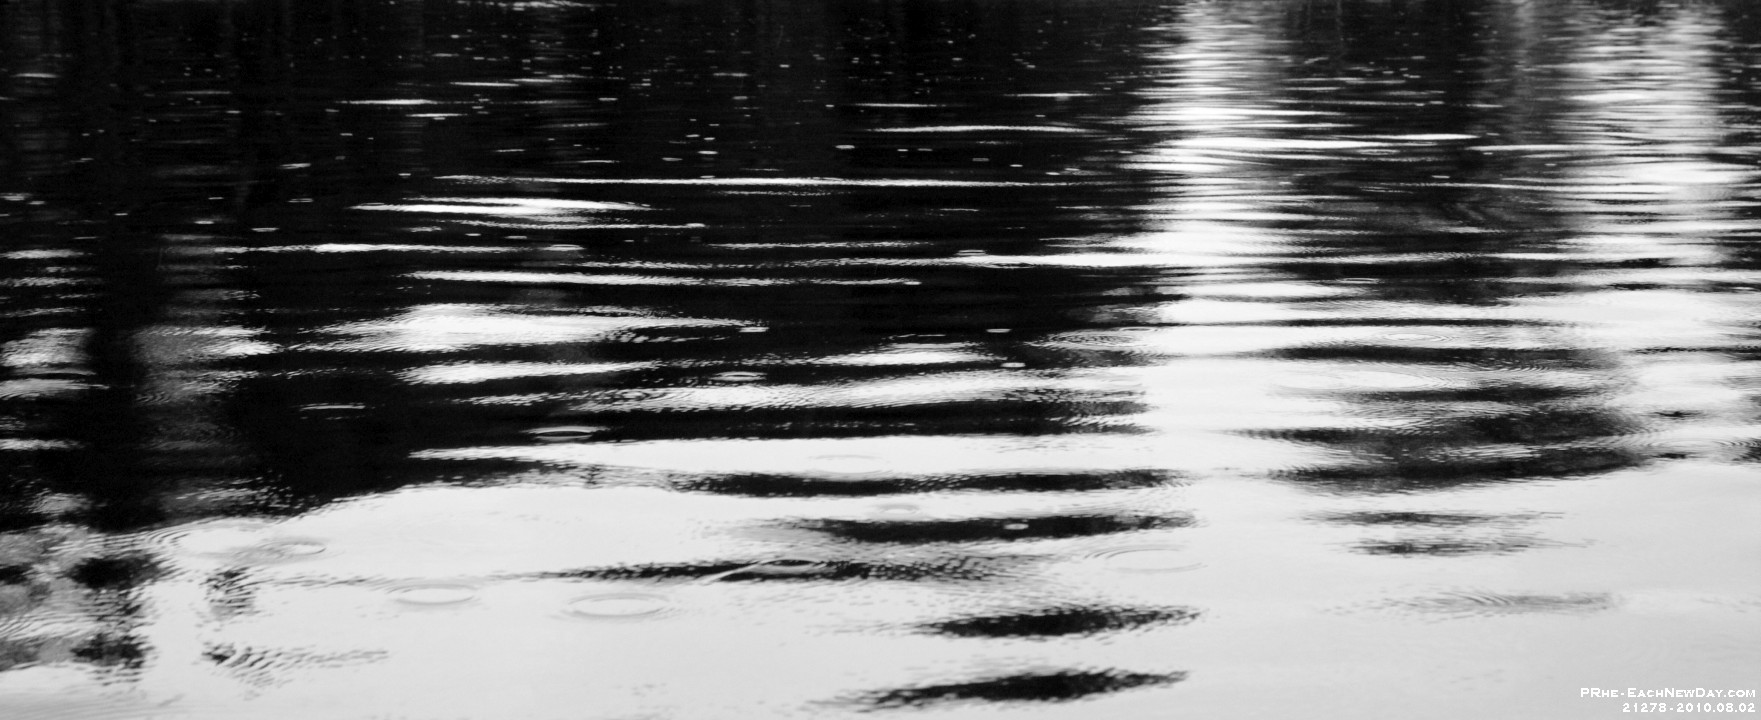 21278CrBwLe - Vacation 2010 - Kayak ride with Beth - Cottage